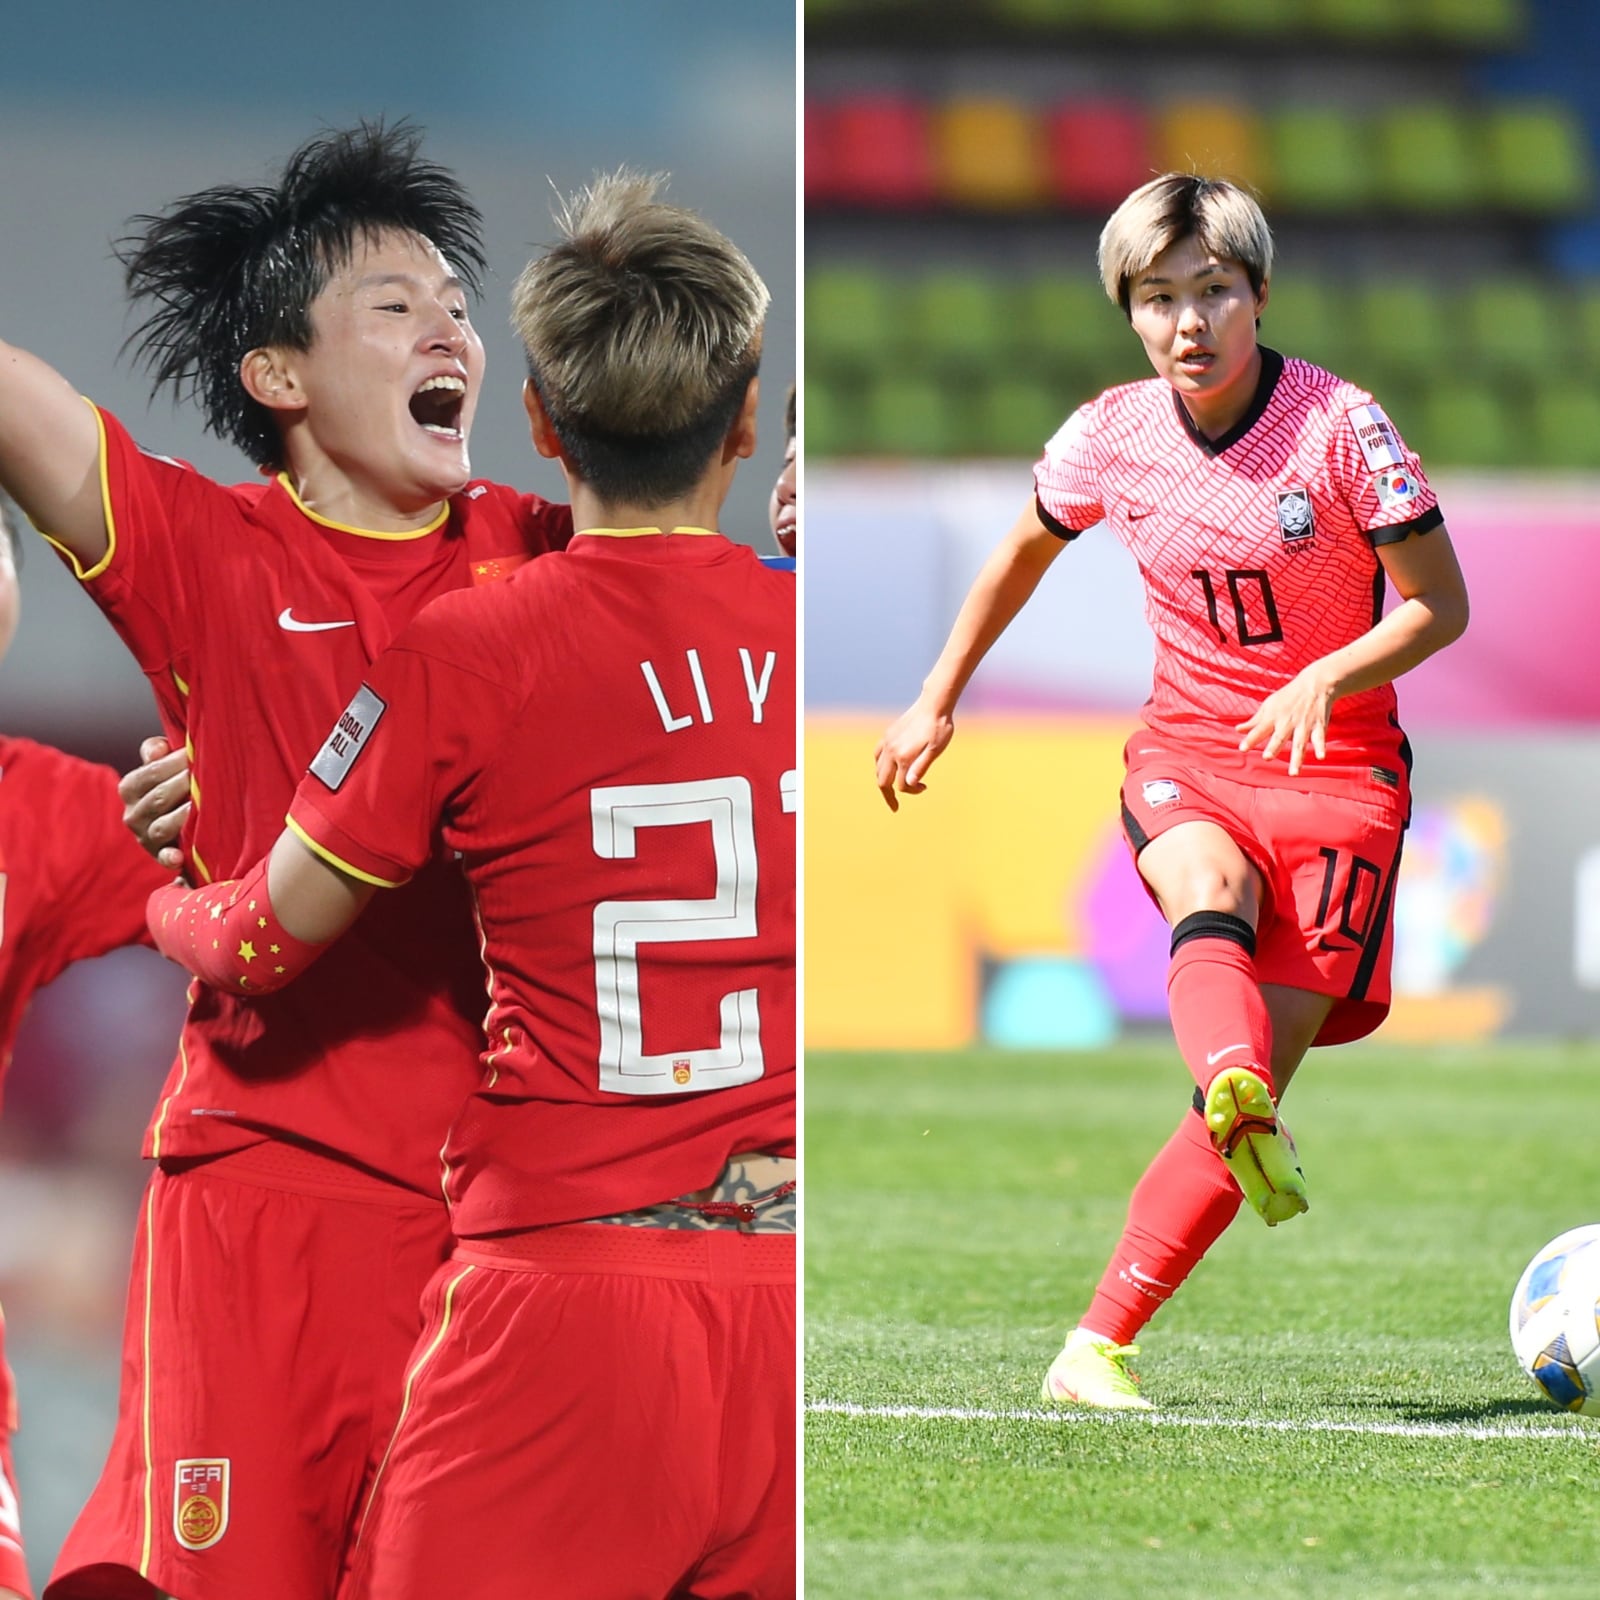 Korean women's football is moving backwards' - Cho determined to take Asian  Cup 'opportunity' with South Korea